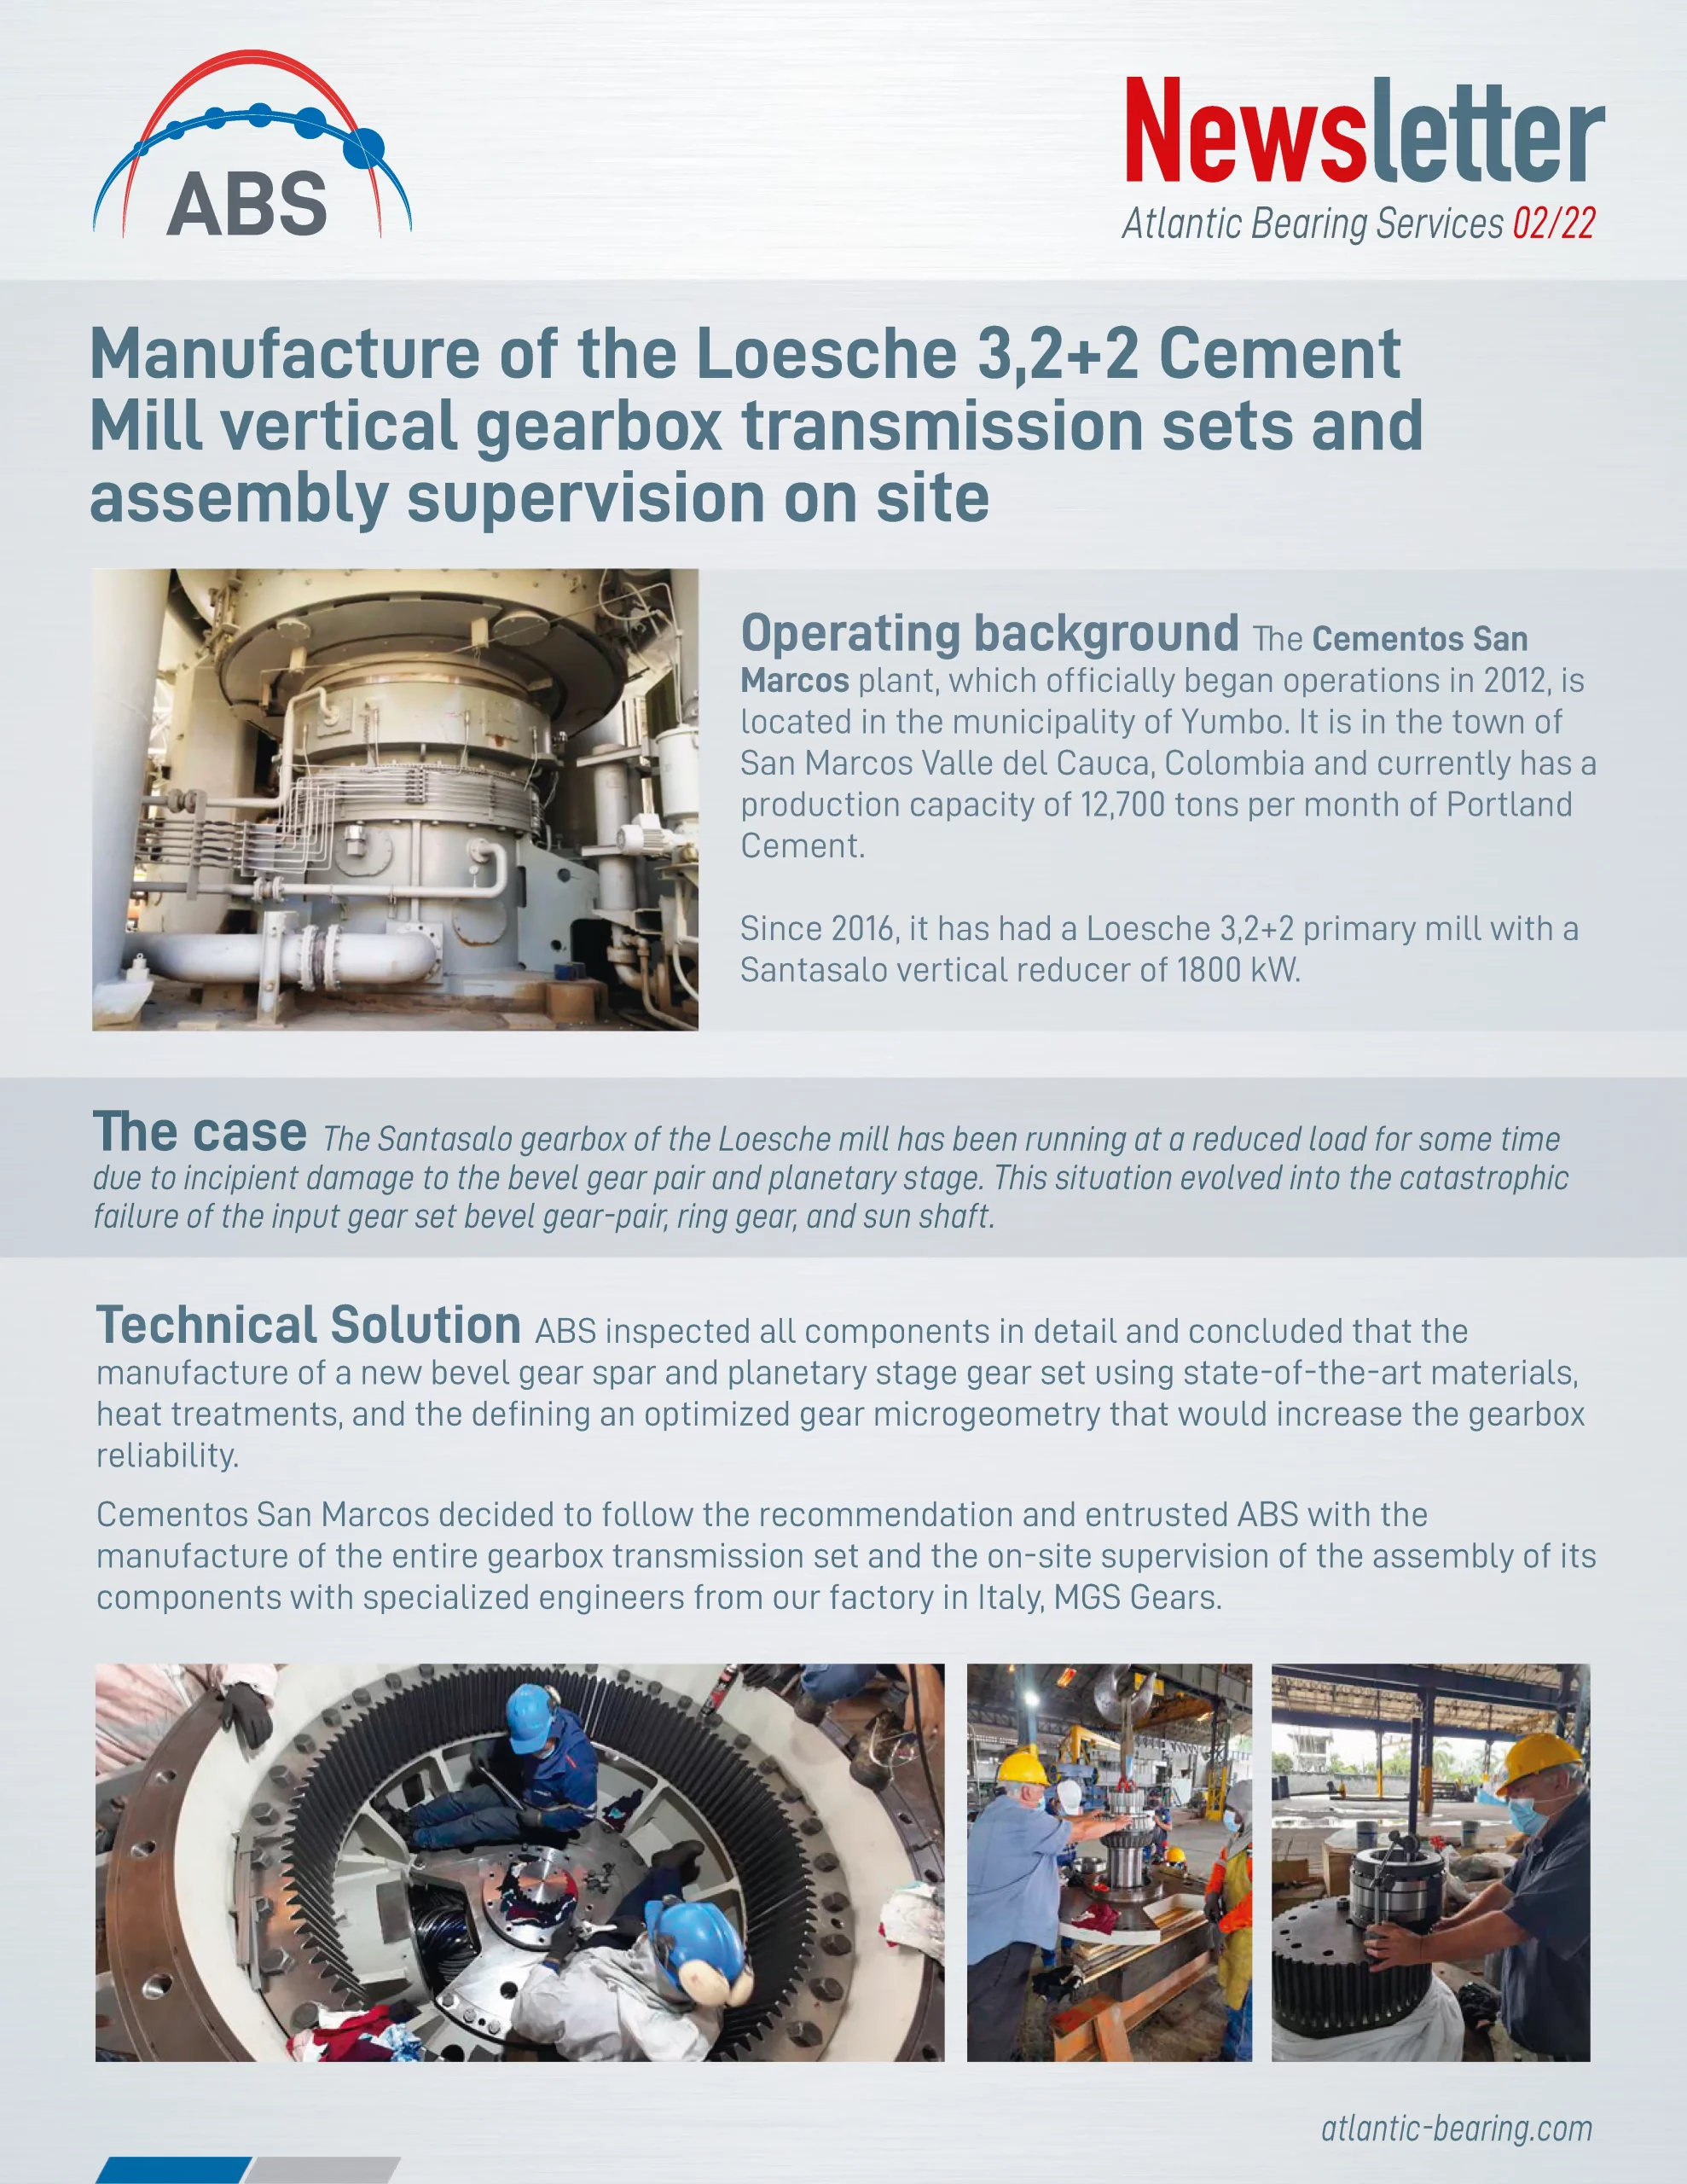 Manufacture of the Loesche 3.2+2 Cement Mill vertical gearbox transmission set and supervision of assembly on location